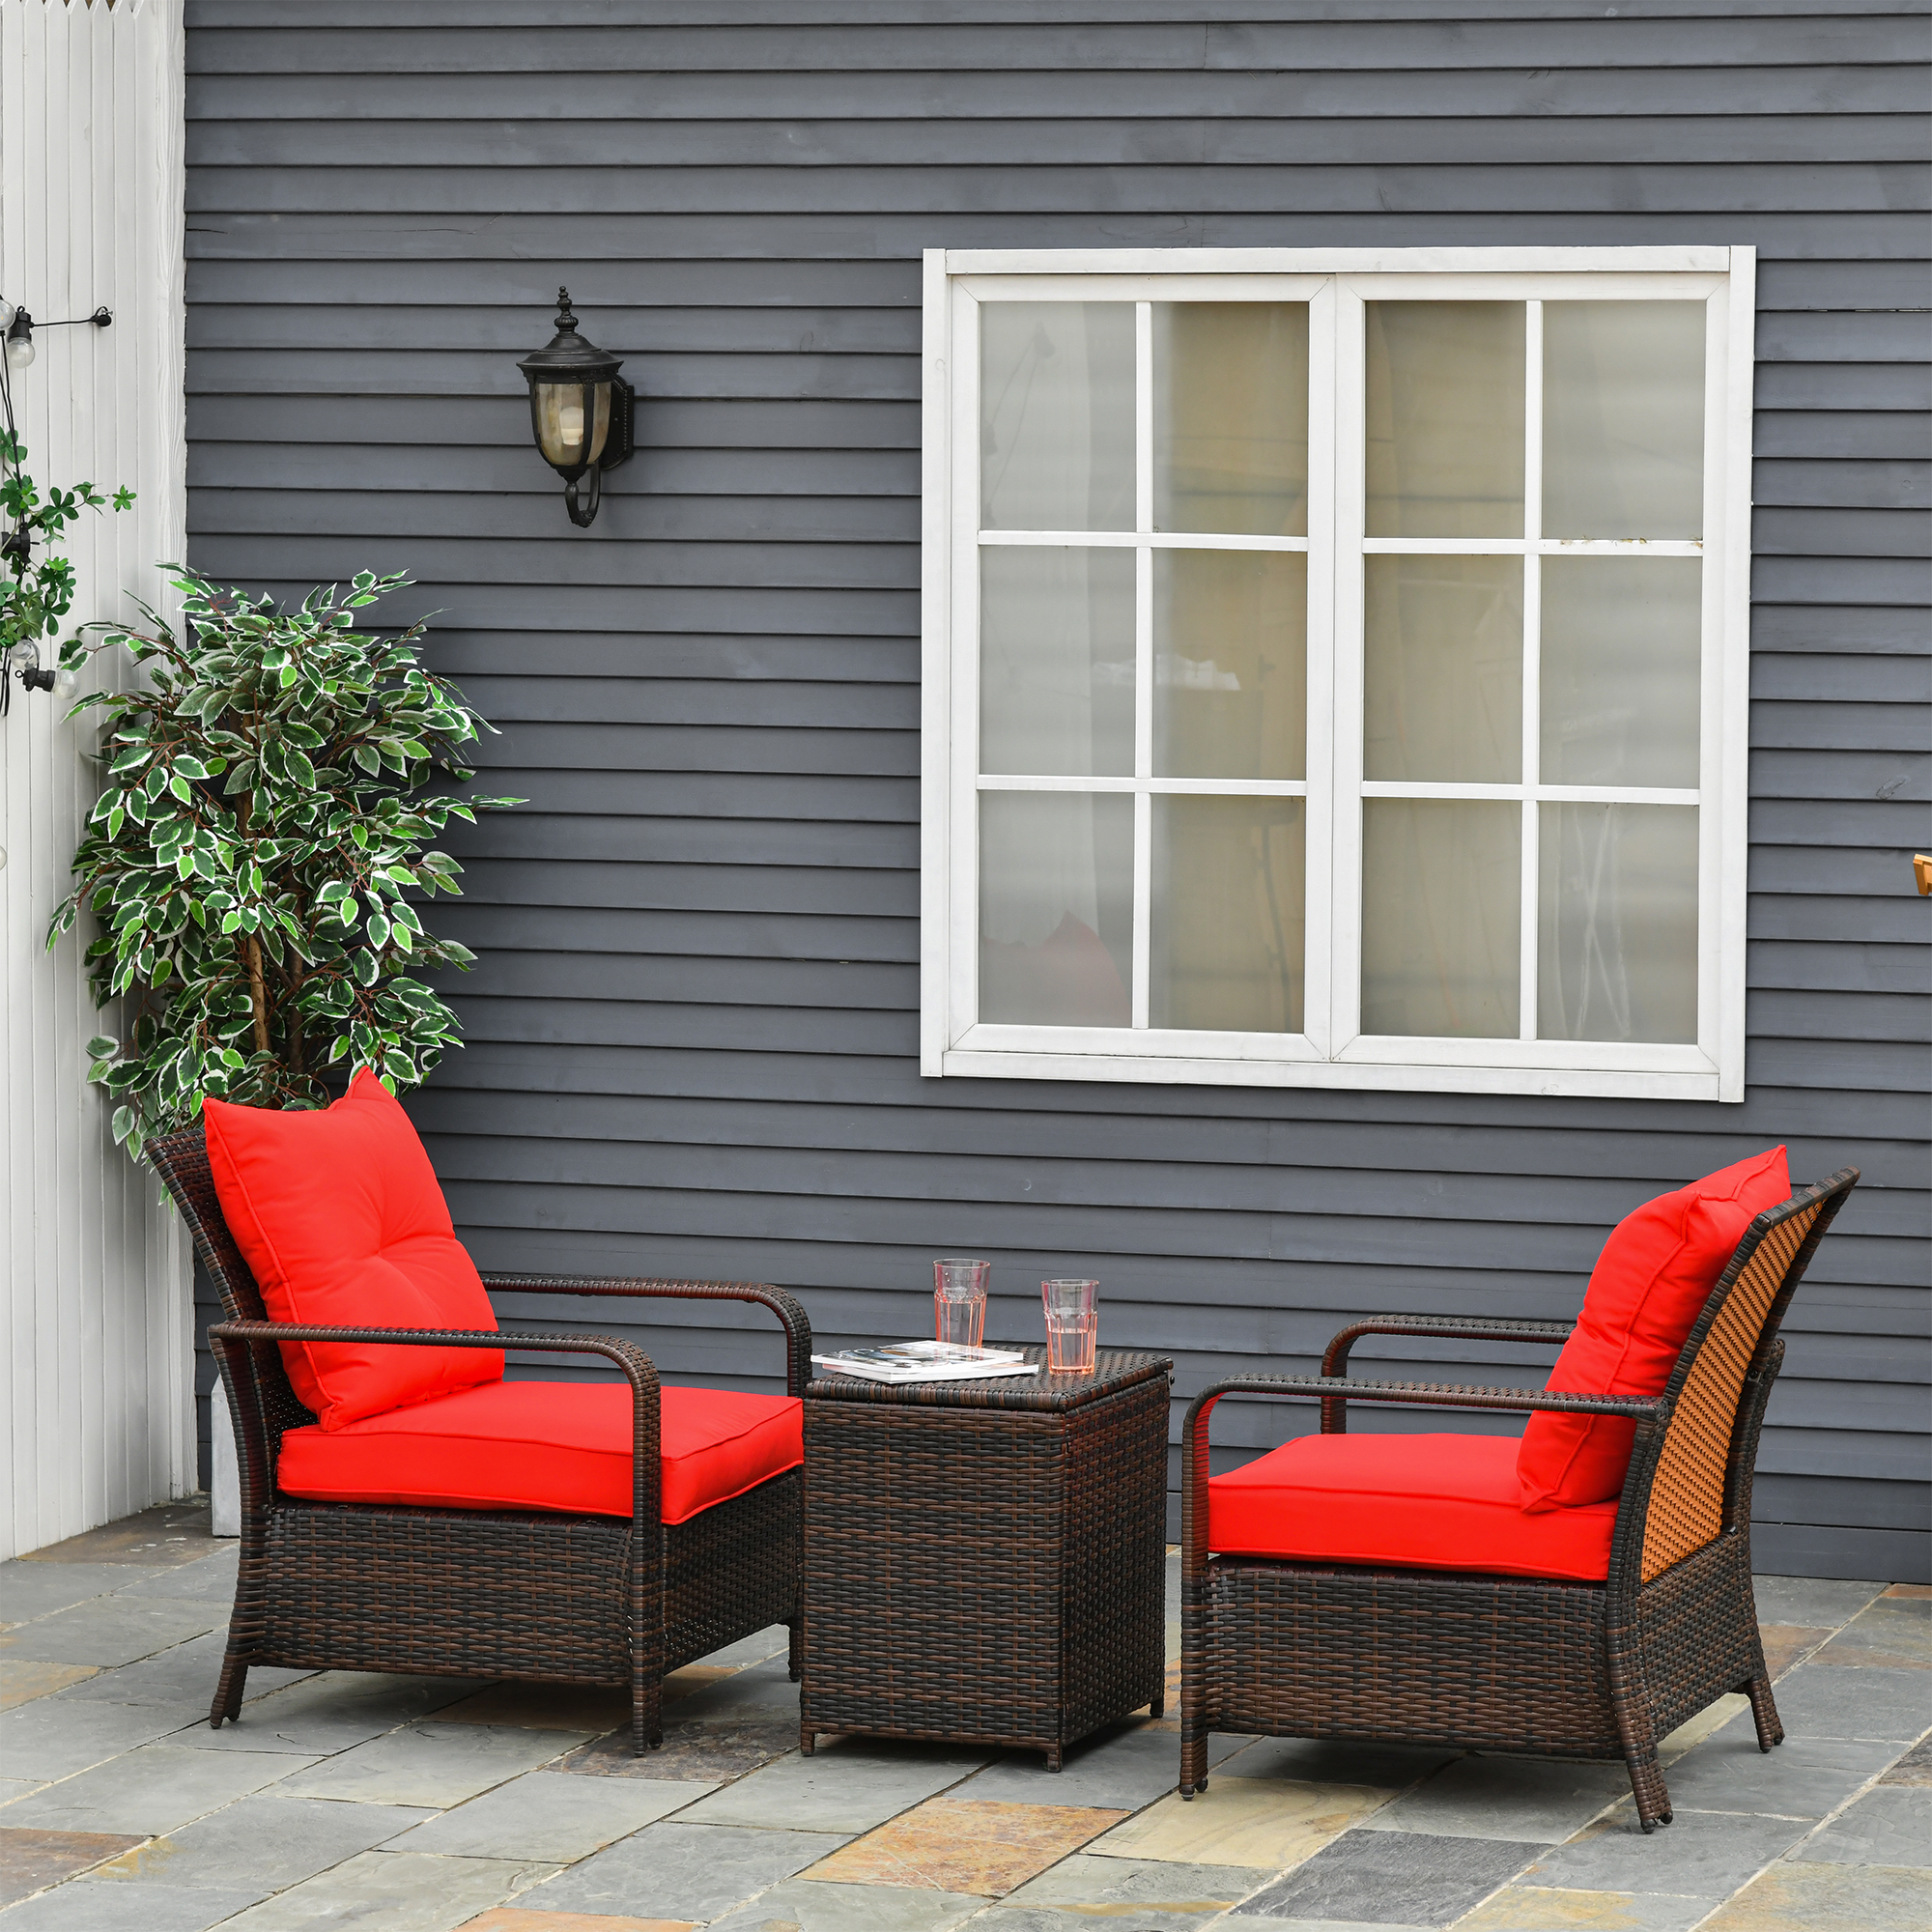 Outsunny 3 Piece Patio Furniture Set, PE Wicker Storage Table & Chairs, Red - image 2 of 9